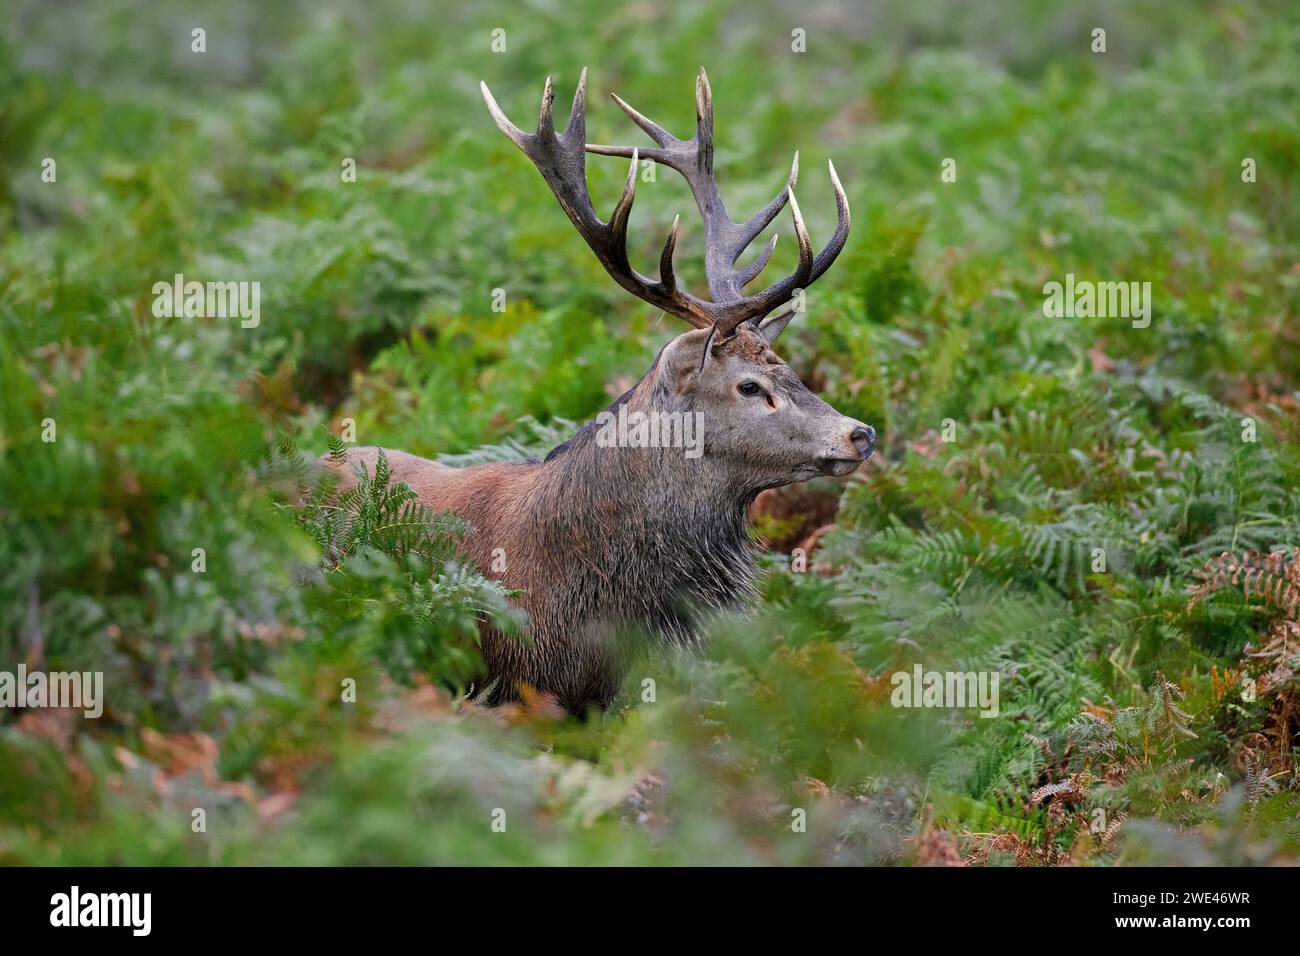 Red deer (Cervus elaphus) stag standing among bracken ferns in forest during the rut in autumn / fall Stock Photo